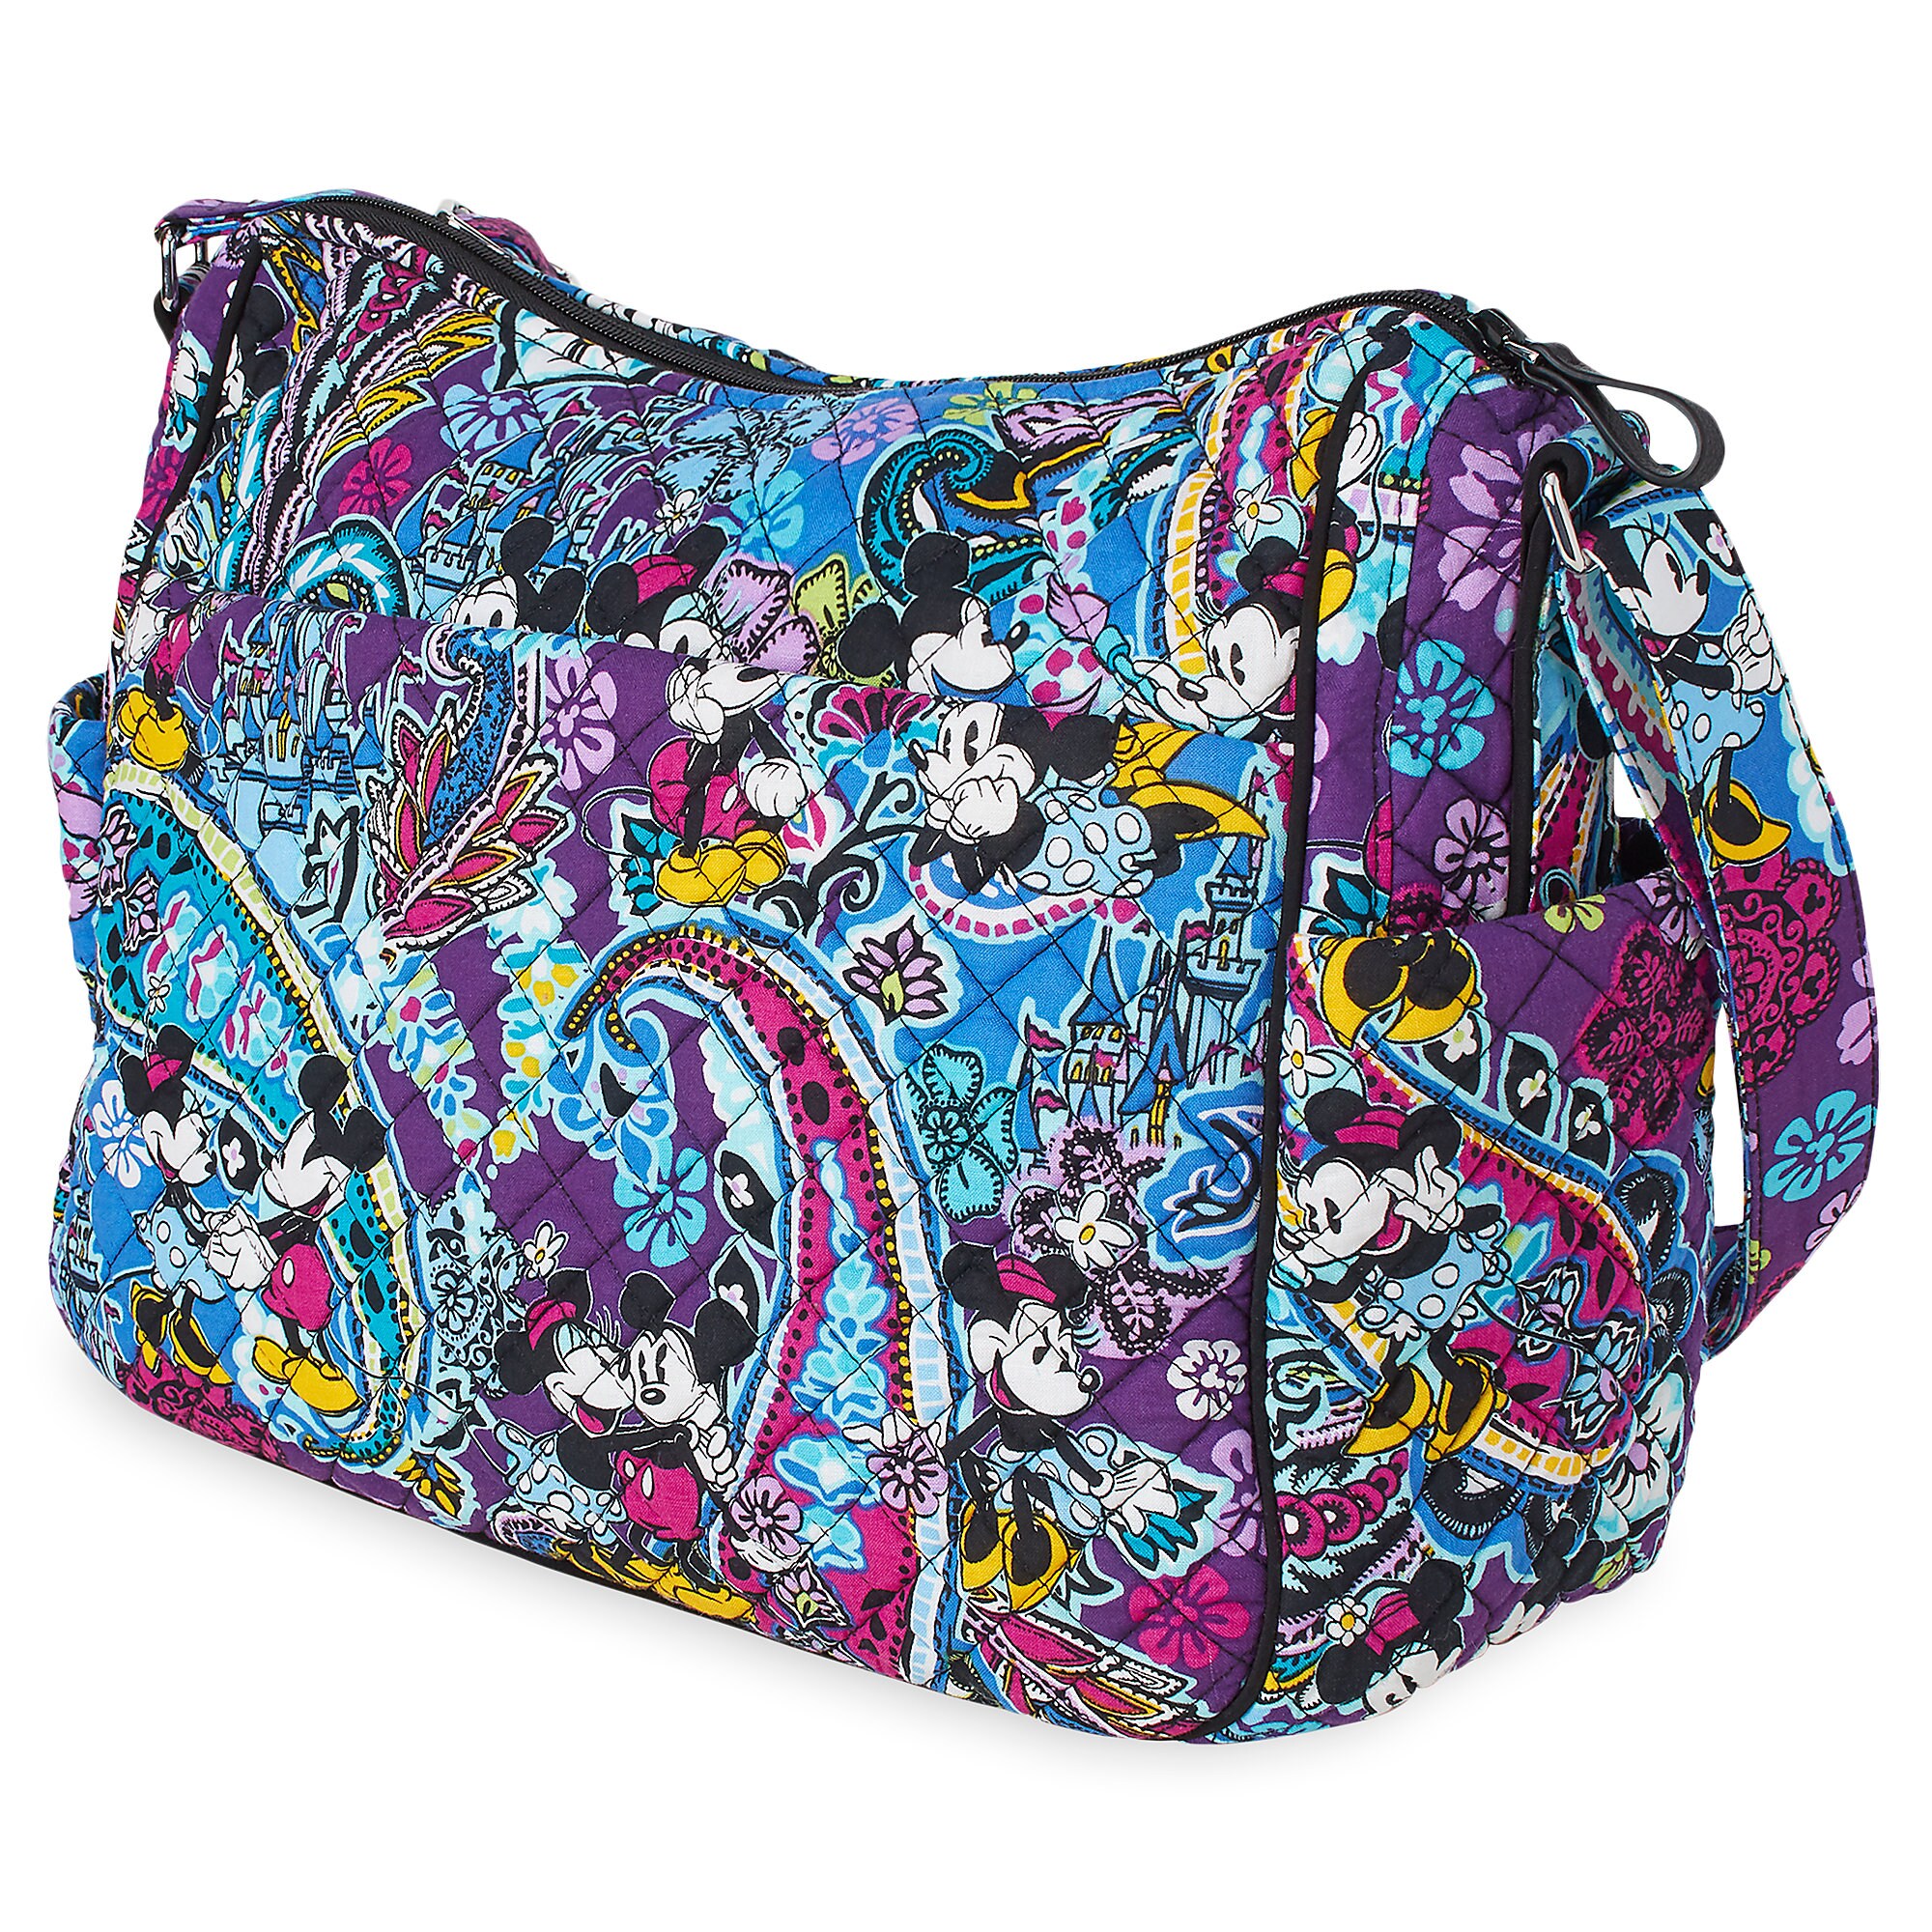 Mickey and Minnie Mouse Paisley On the Go Crossbody Bag by Vera Bradley now out – Dis ...